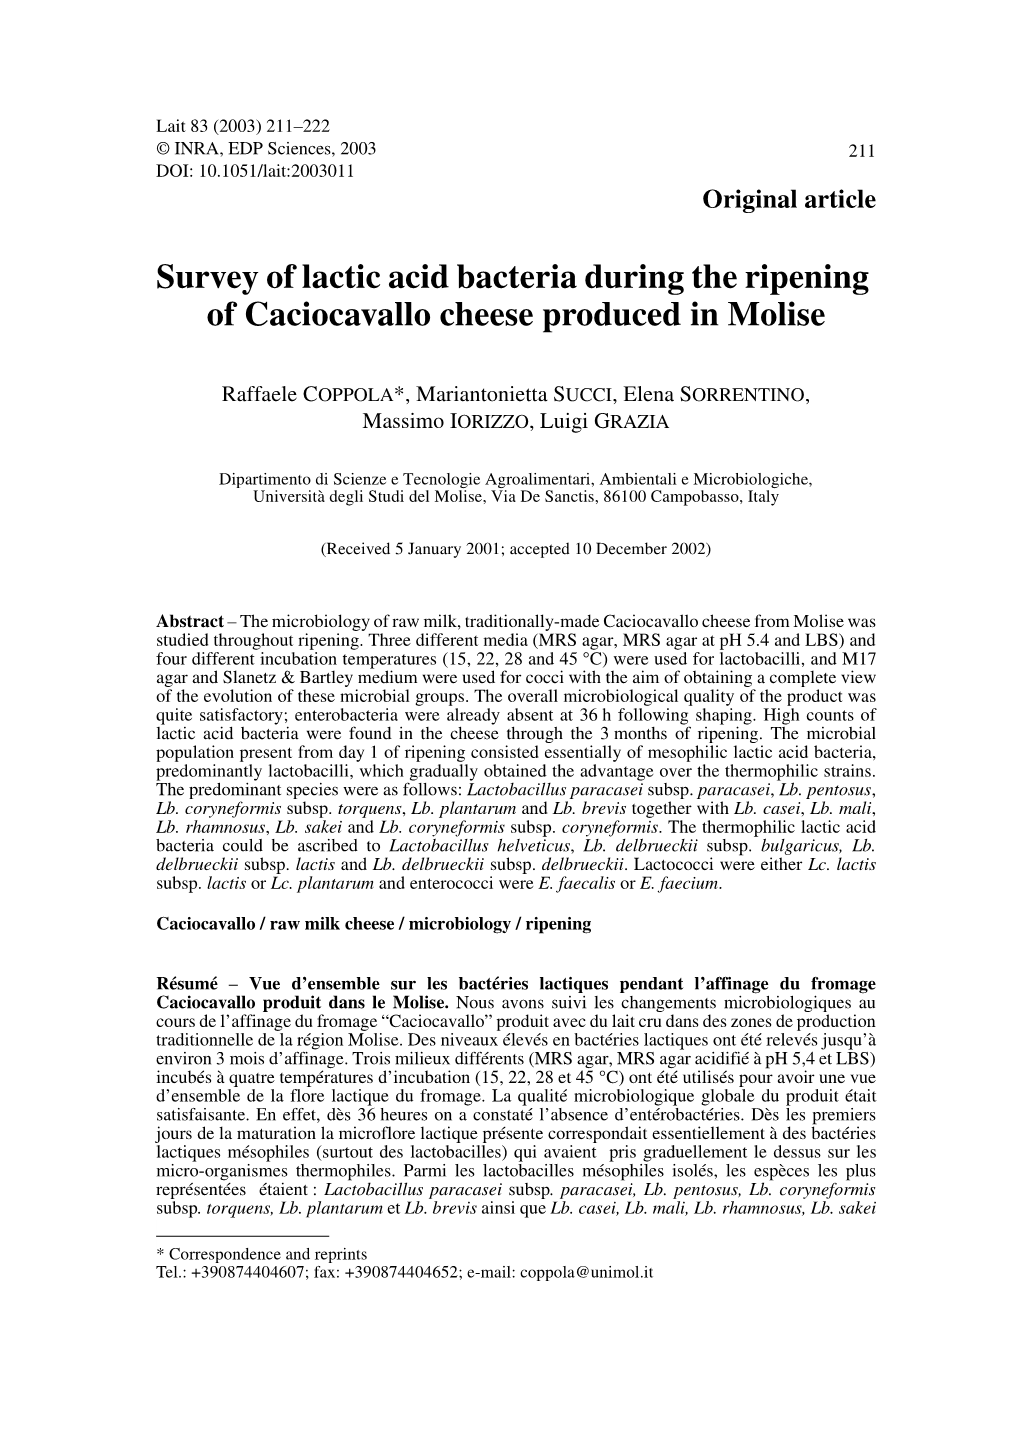 Survey of Lactic Acid Bacteria During the Ripening of Caciocavallo Cheese Produced in Molise